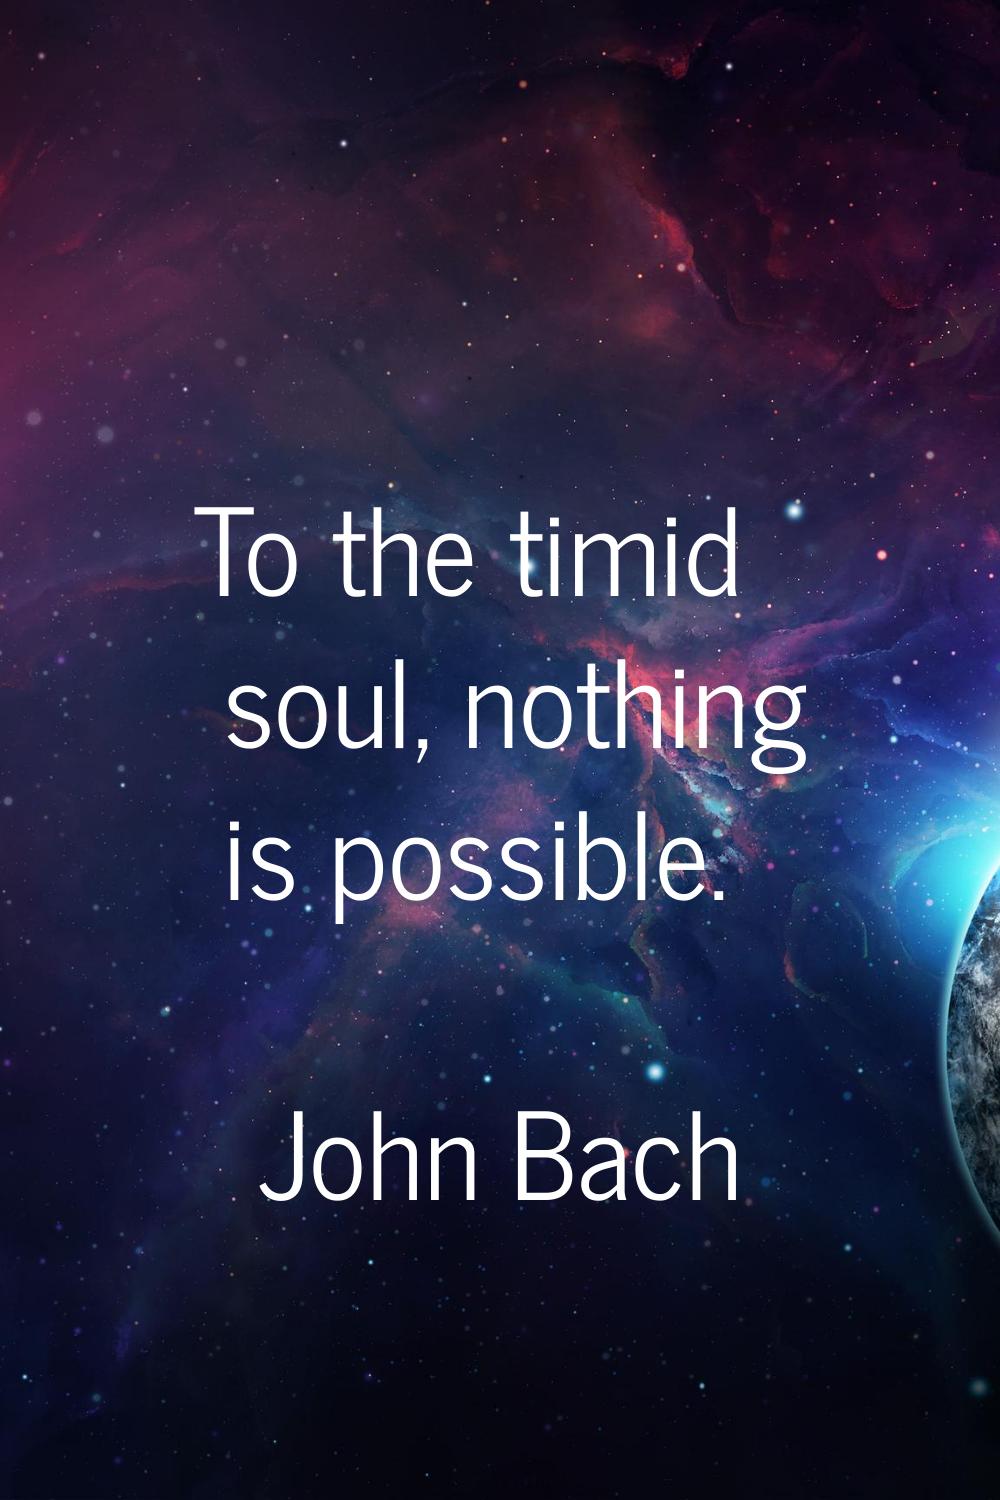 To the timid soul, nothing is possible.